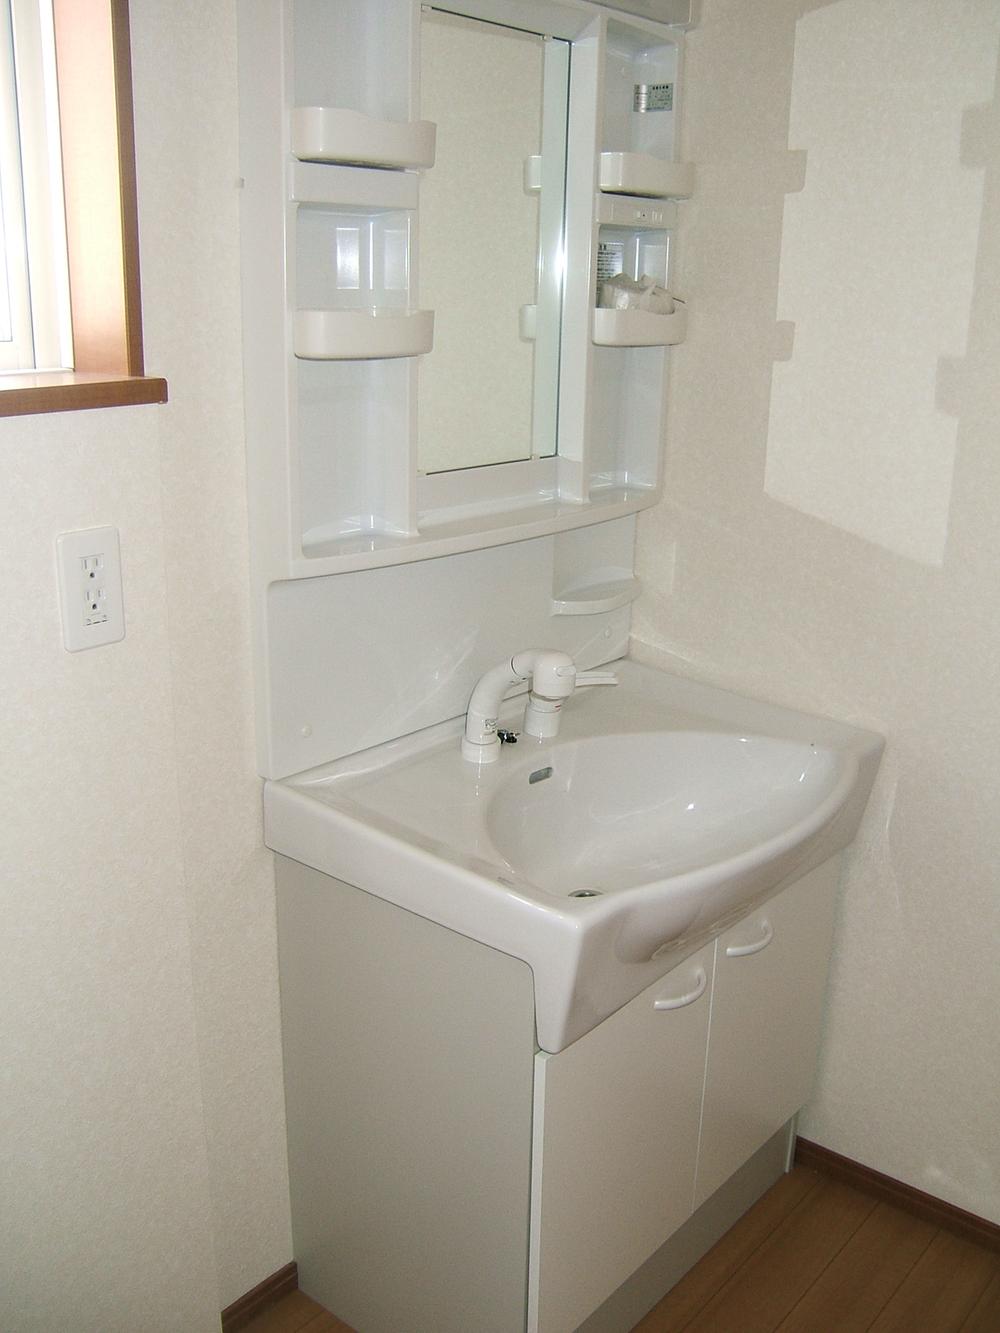 Wash basin, toilet. The company specification example